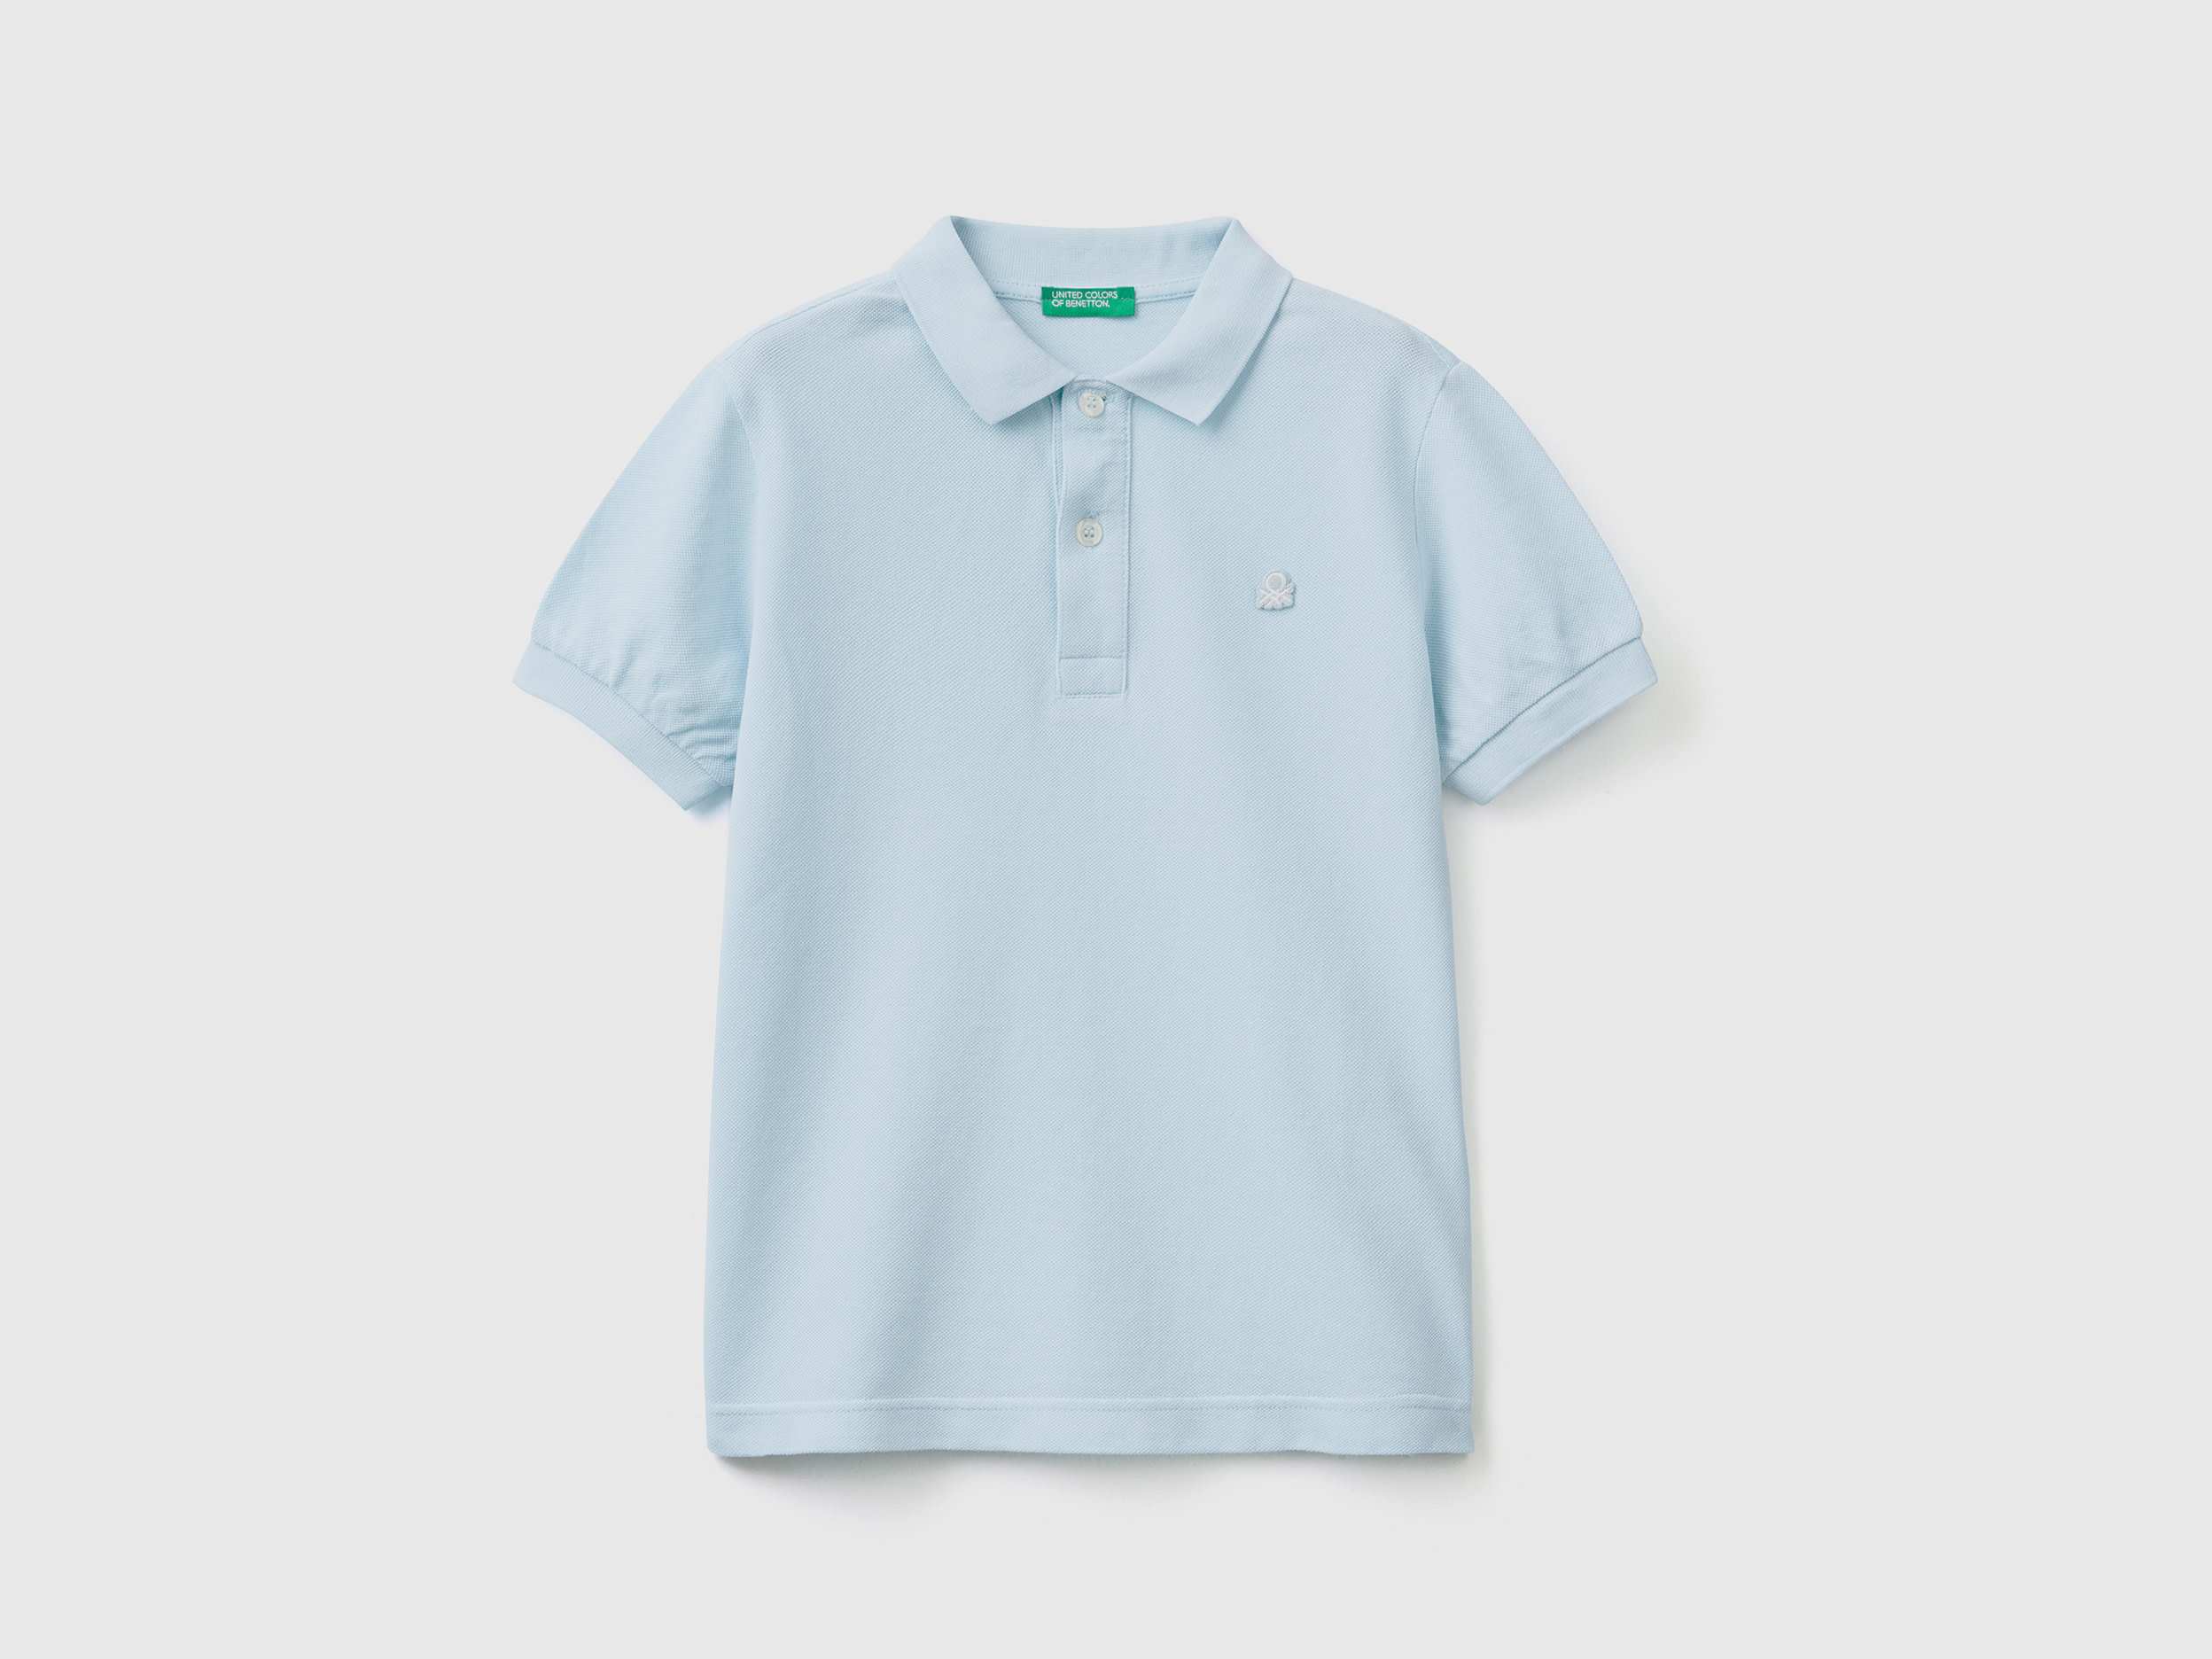 Image of Benetton, Slim Fit Polo In 100% Organic Cotton, size 2XL, Sky Blue, Kids